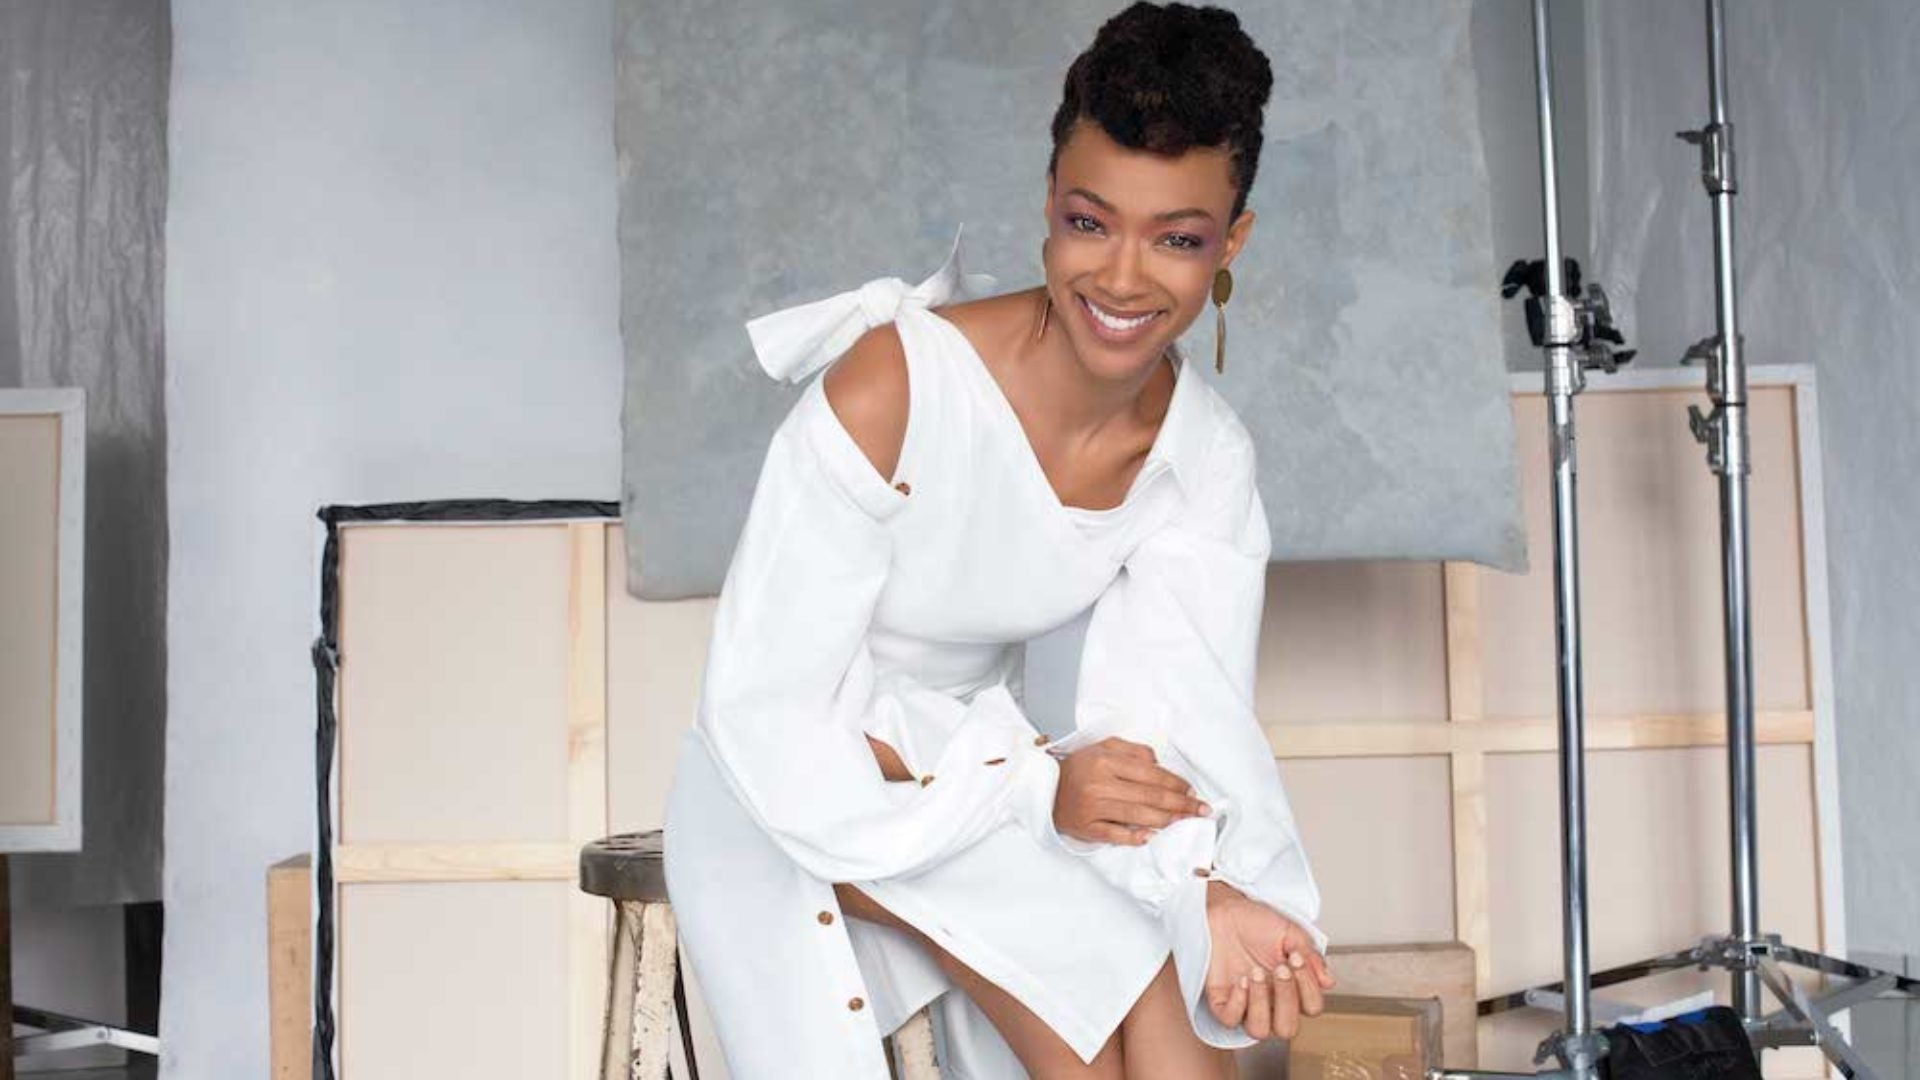 Sonequa Martin-Green Is A Black Woman Who Knows What Its Like To Be First